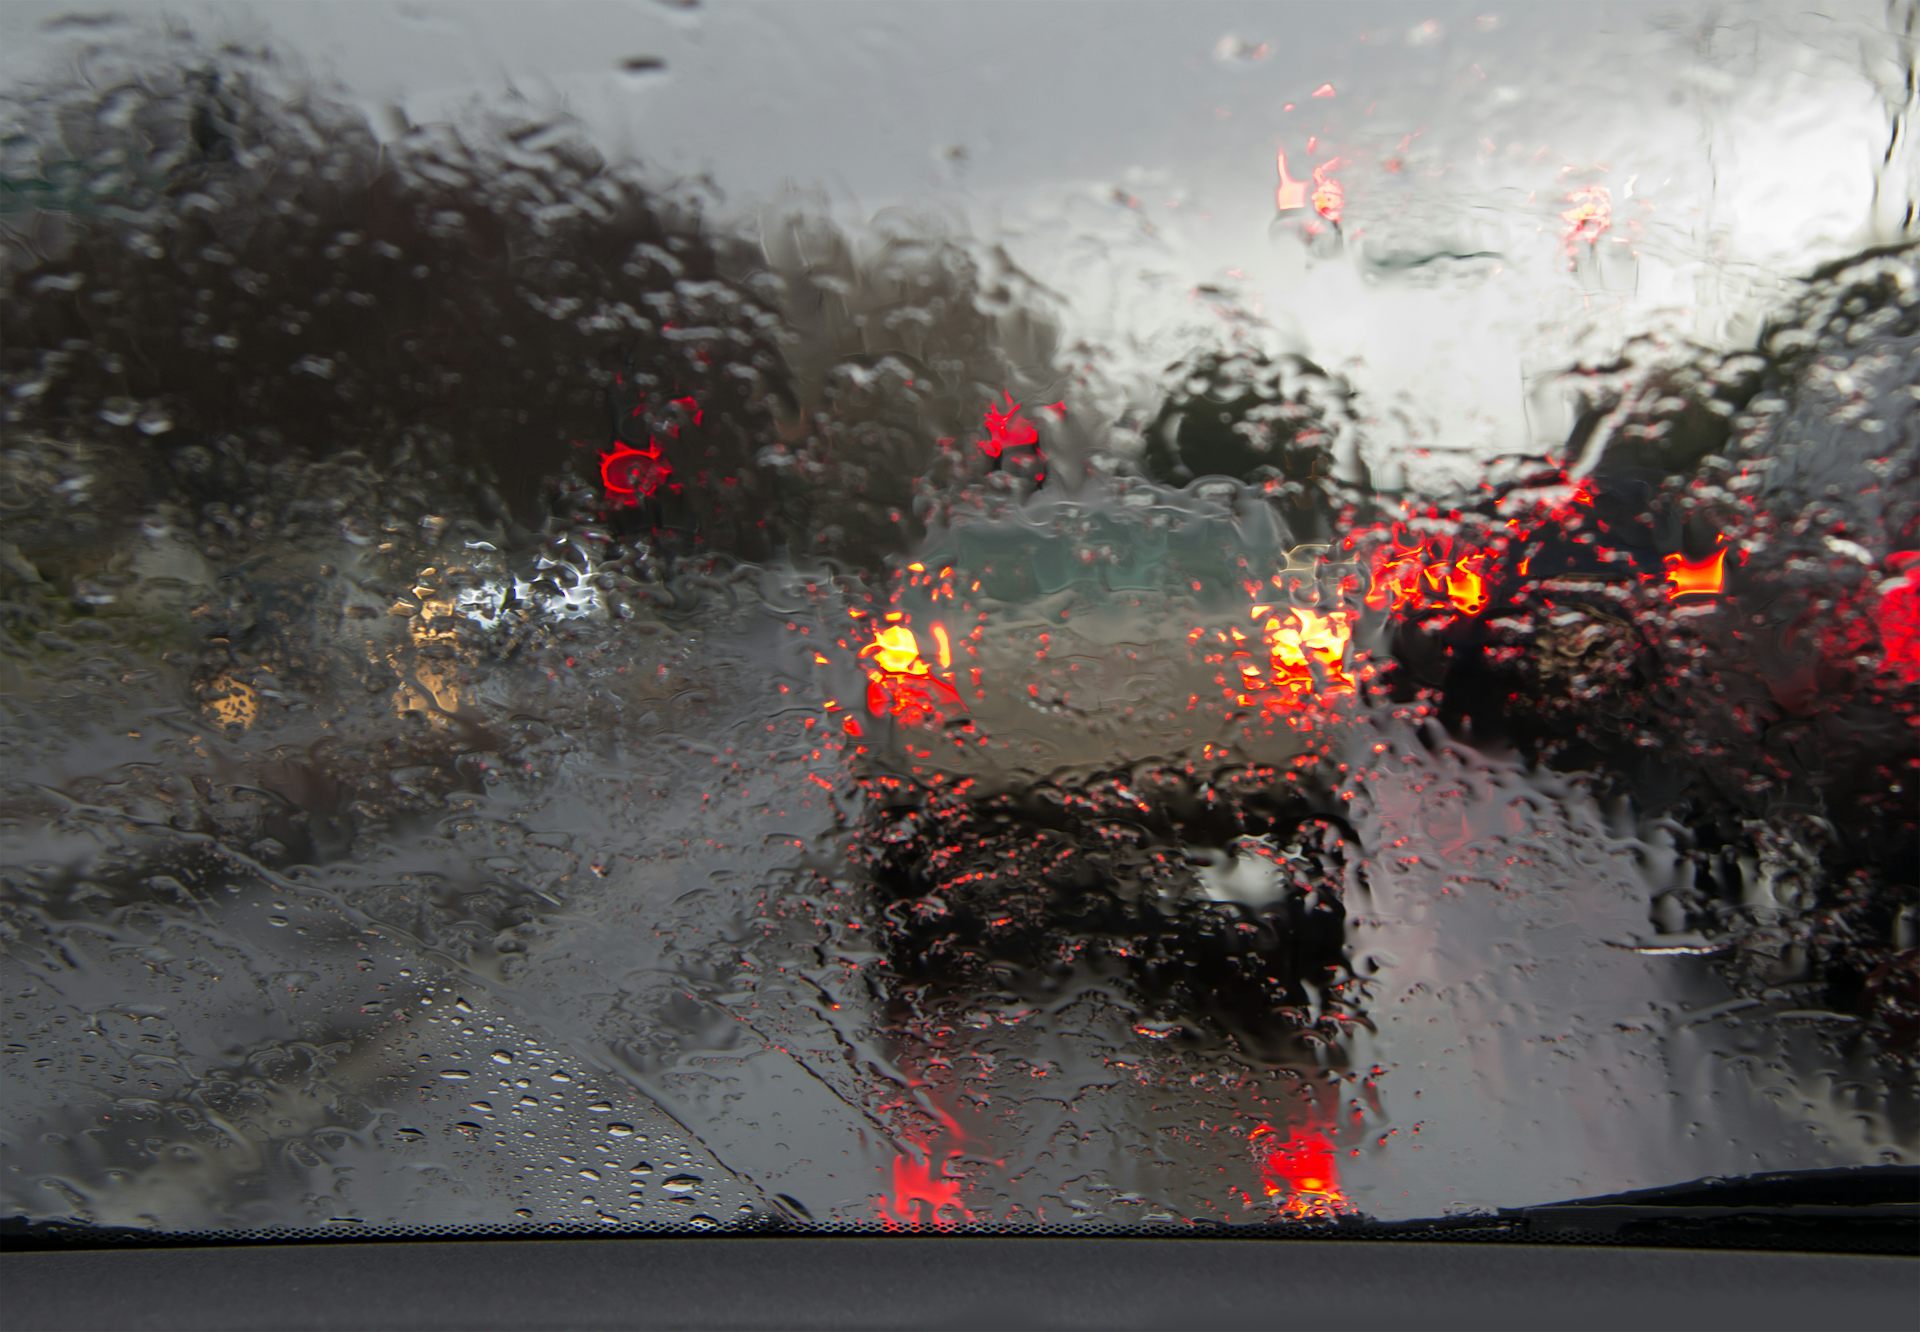 Do people drive differently in the rain? Here's what the research says